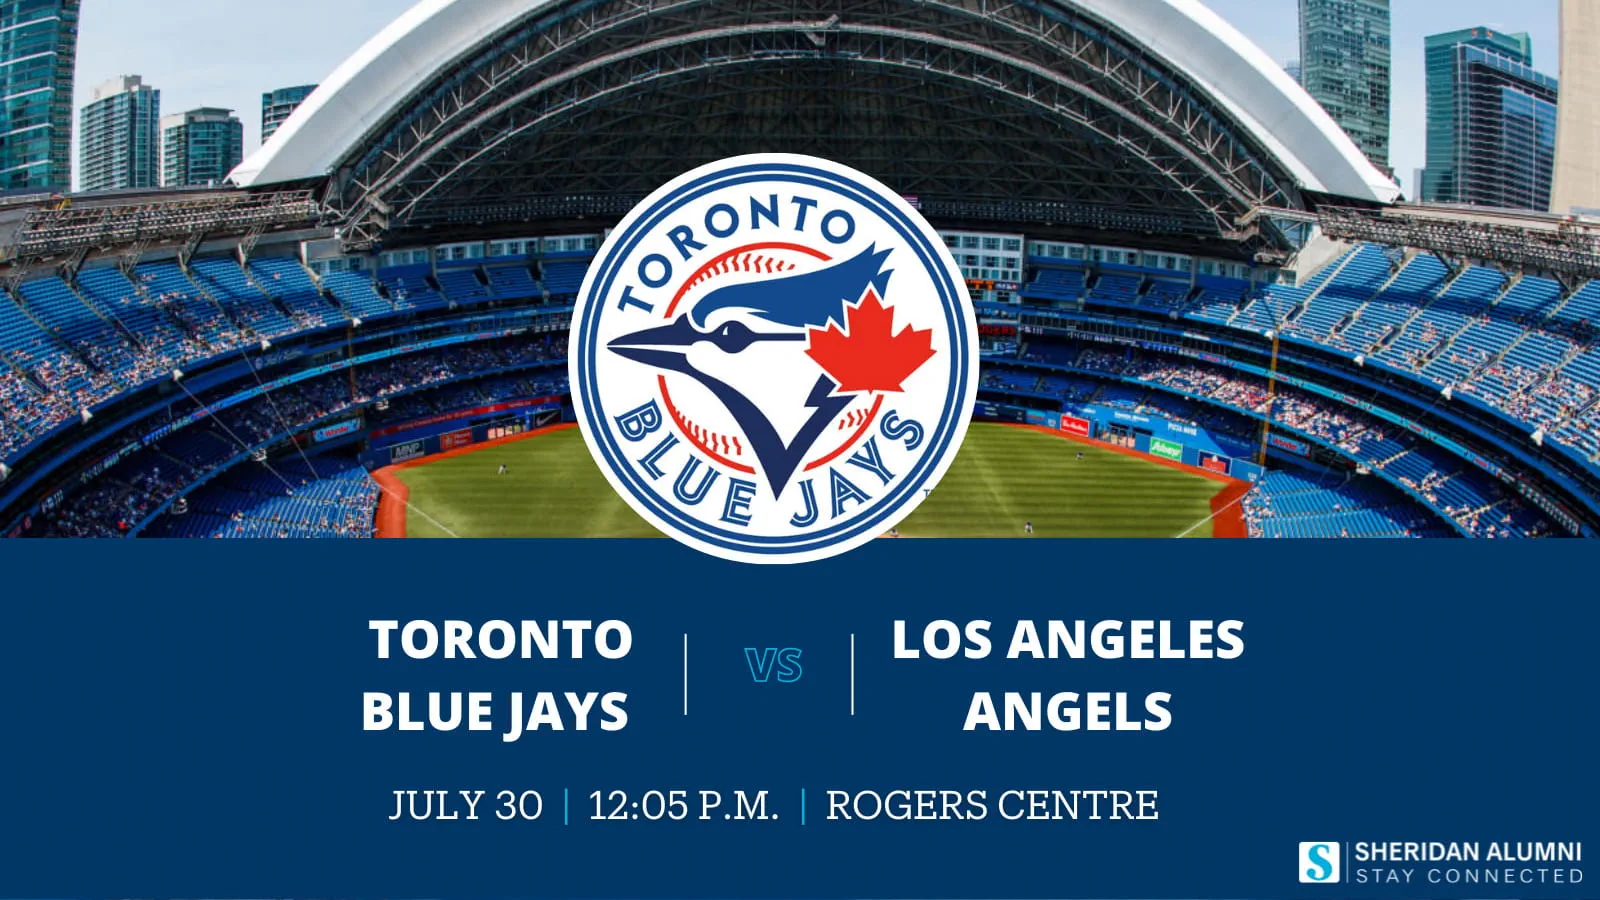 Toronto Blue Jays vs Los Angeles Angels | July 30 | 12:05 p.m. | Rogers Centre | Sheridan Alumni | Stay Connected